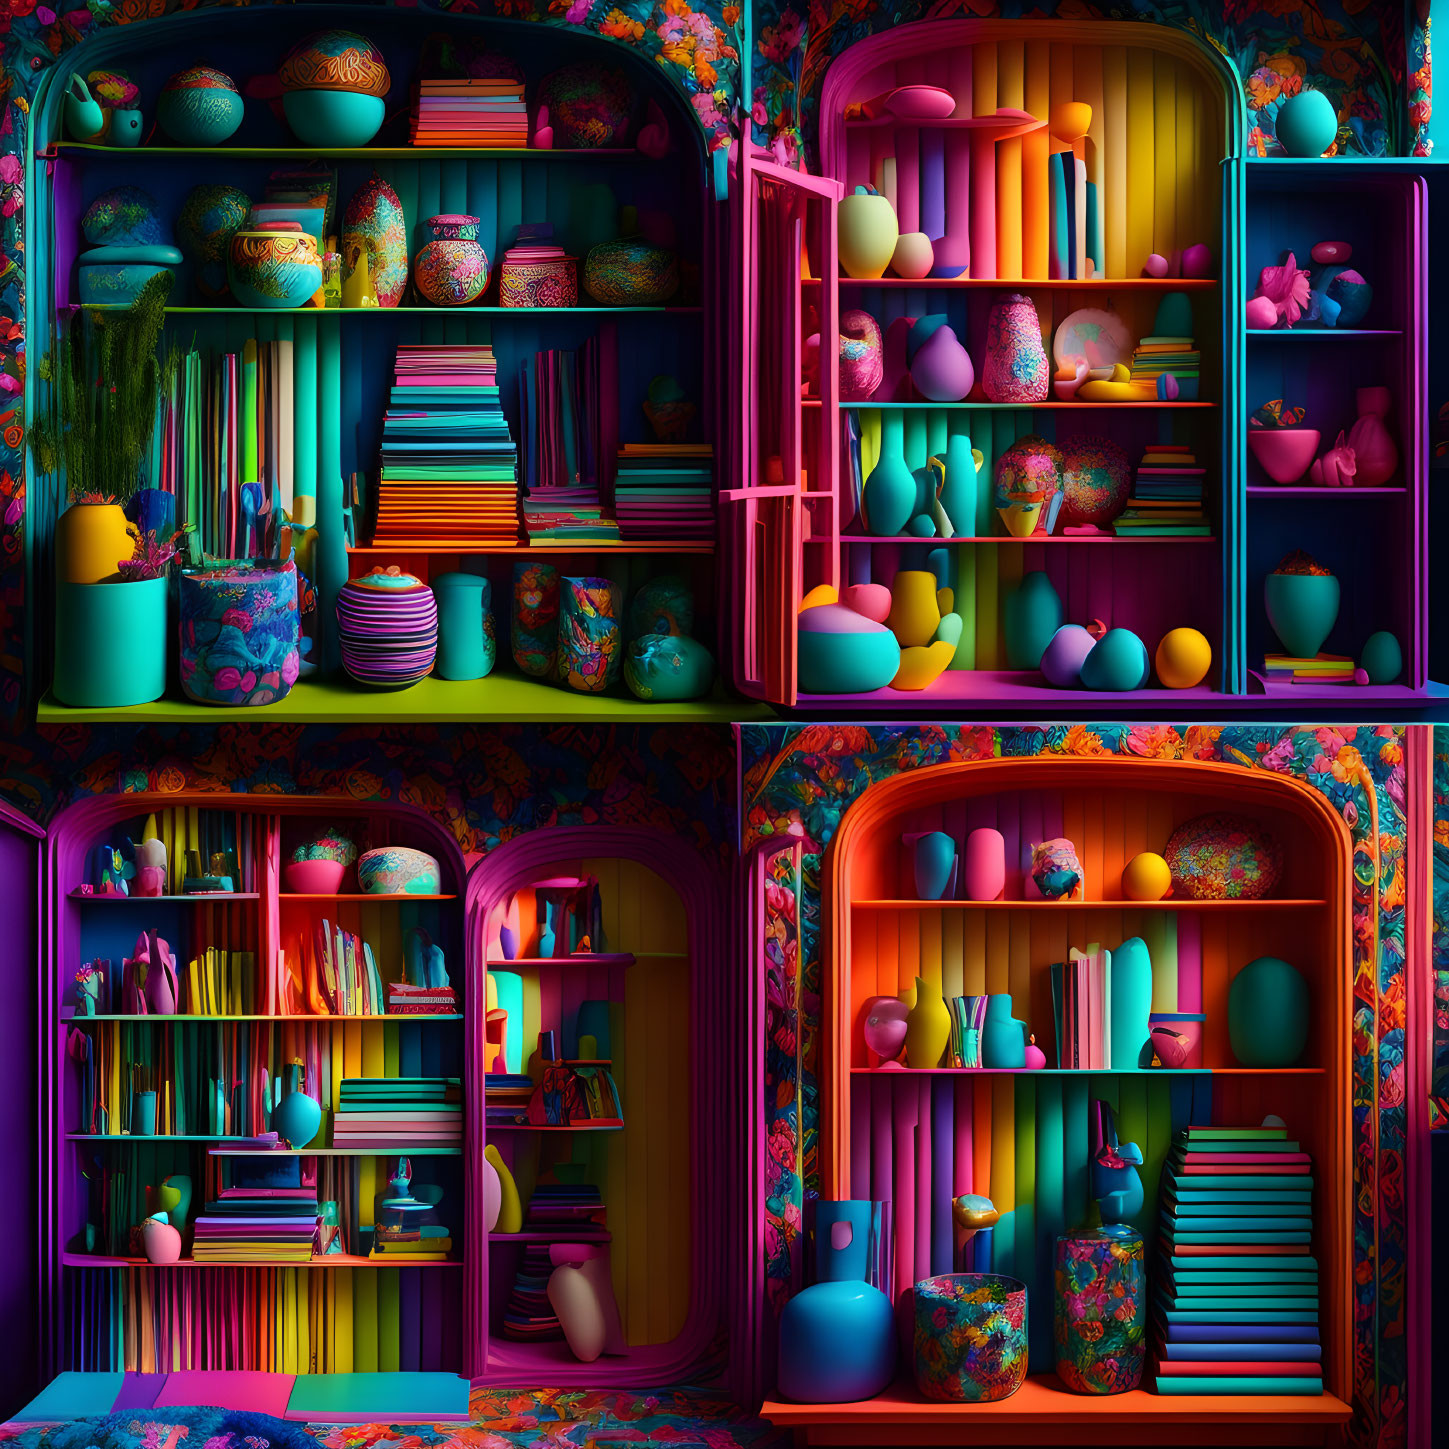 Colorful Bookshelves with Books, Vases, and Decorative Items on Patterned Wallpaper